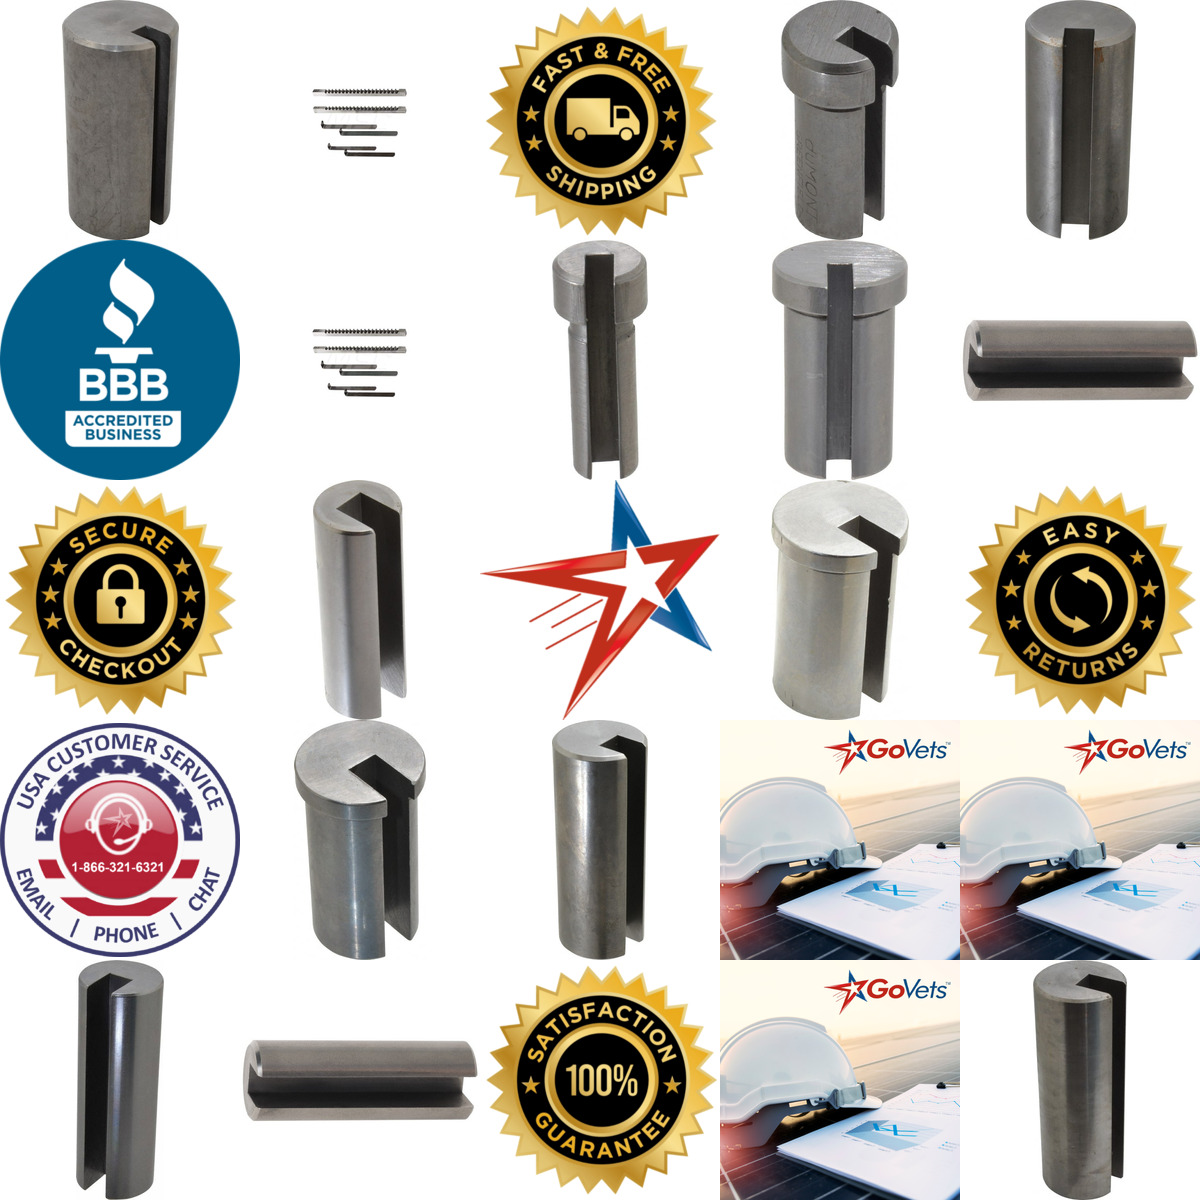 A selection of Broach Bushings products on GoVets